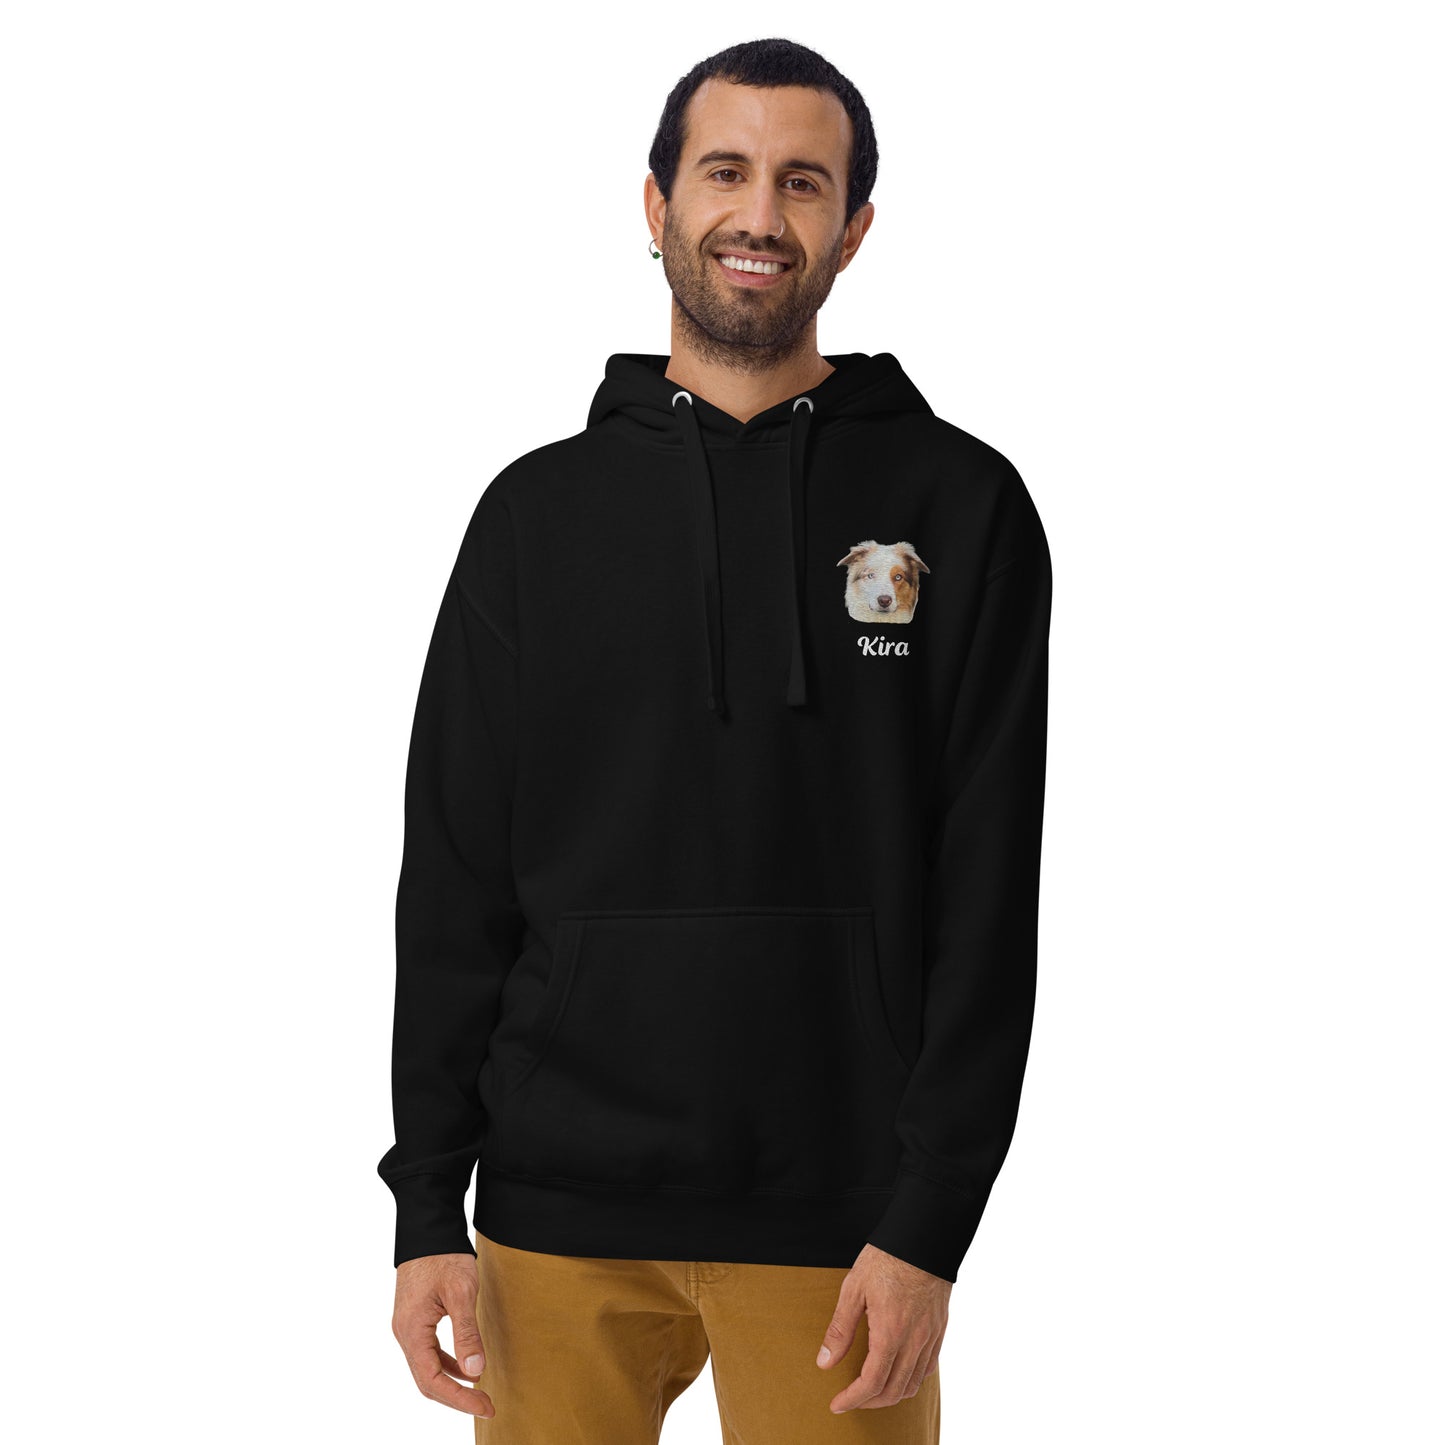 Personalized embroidered hoodie